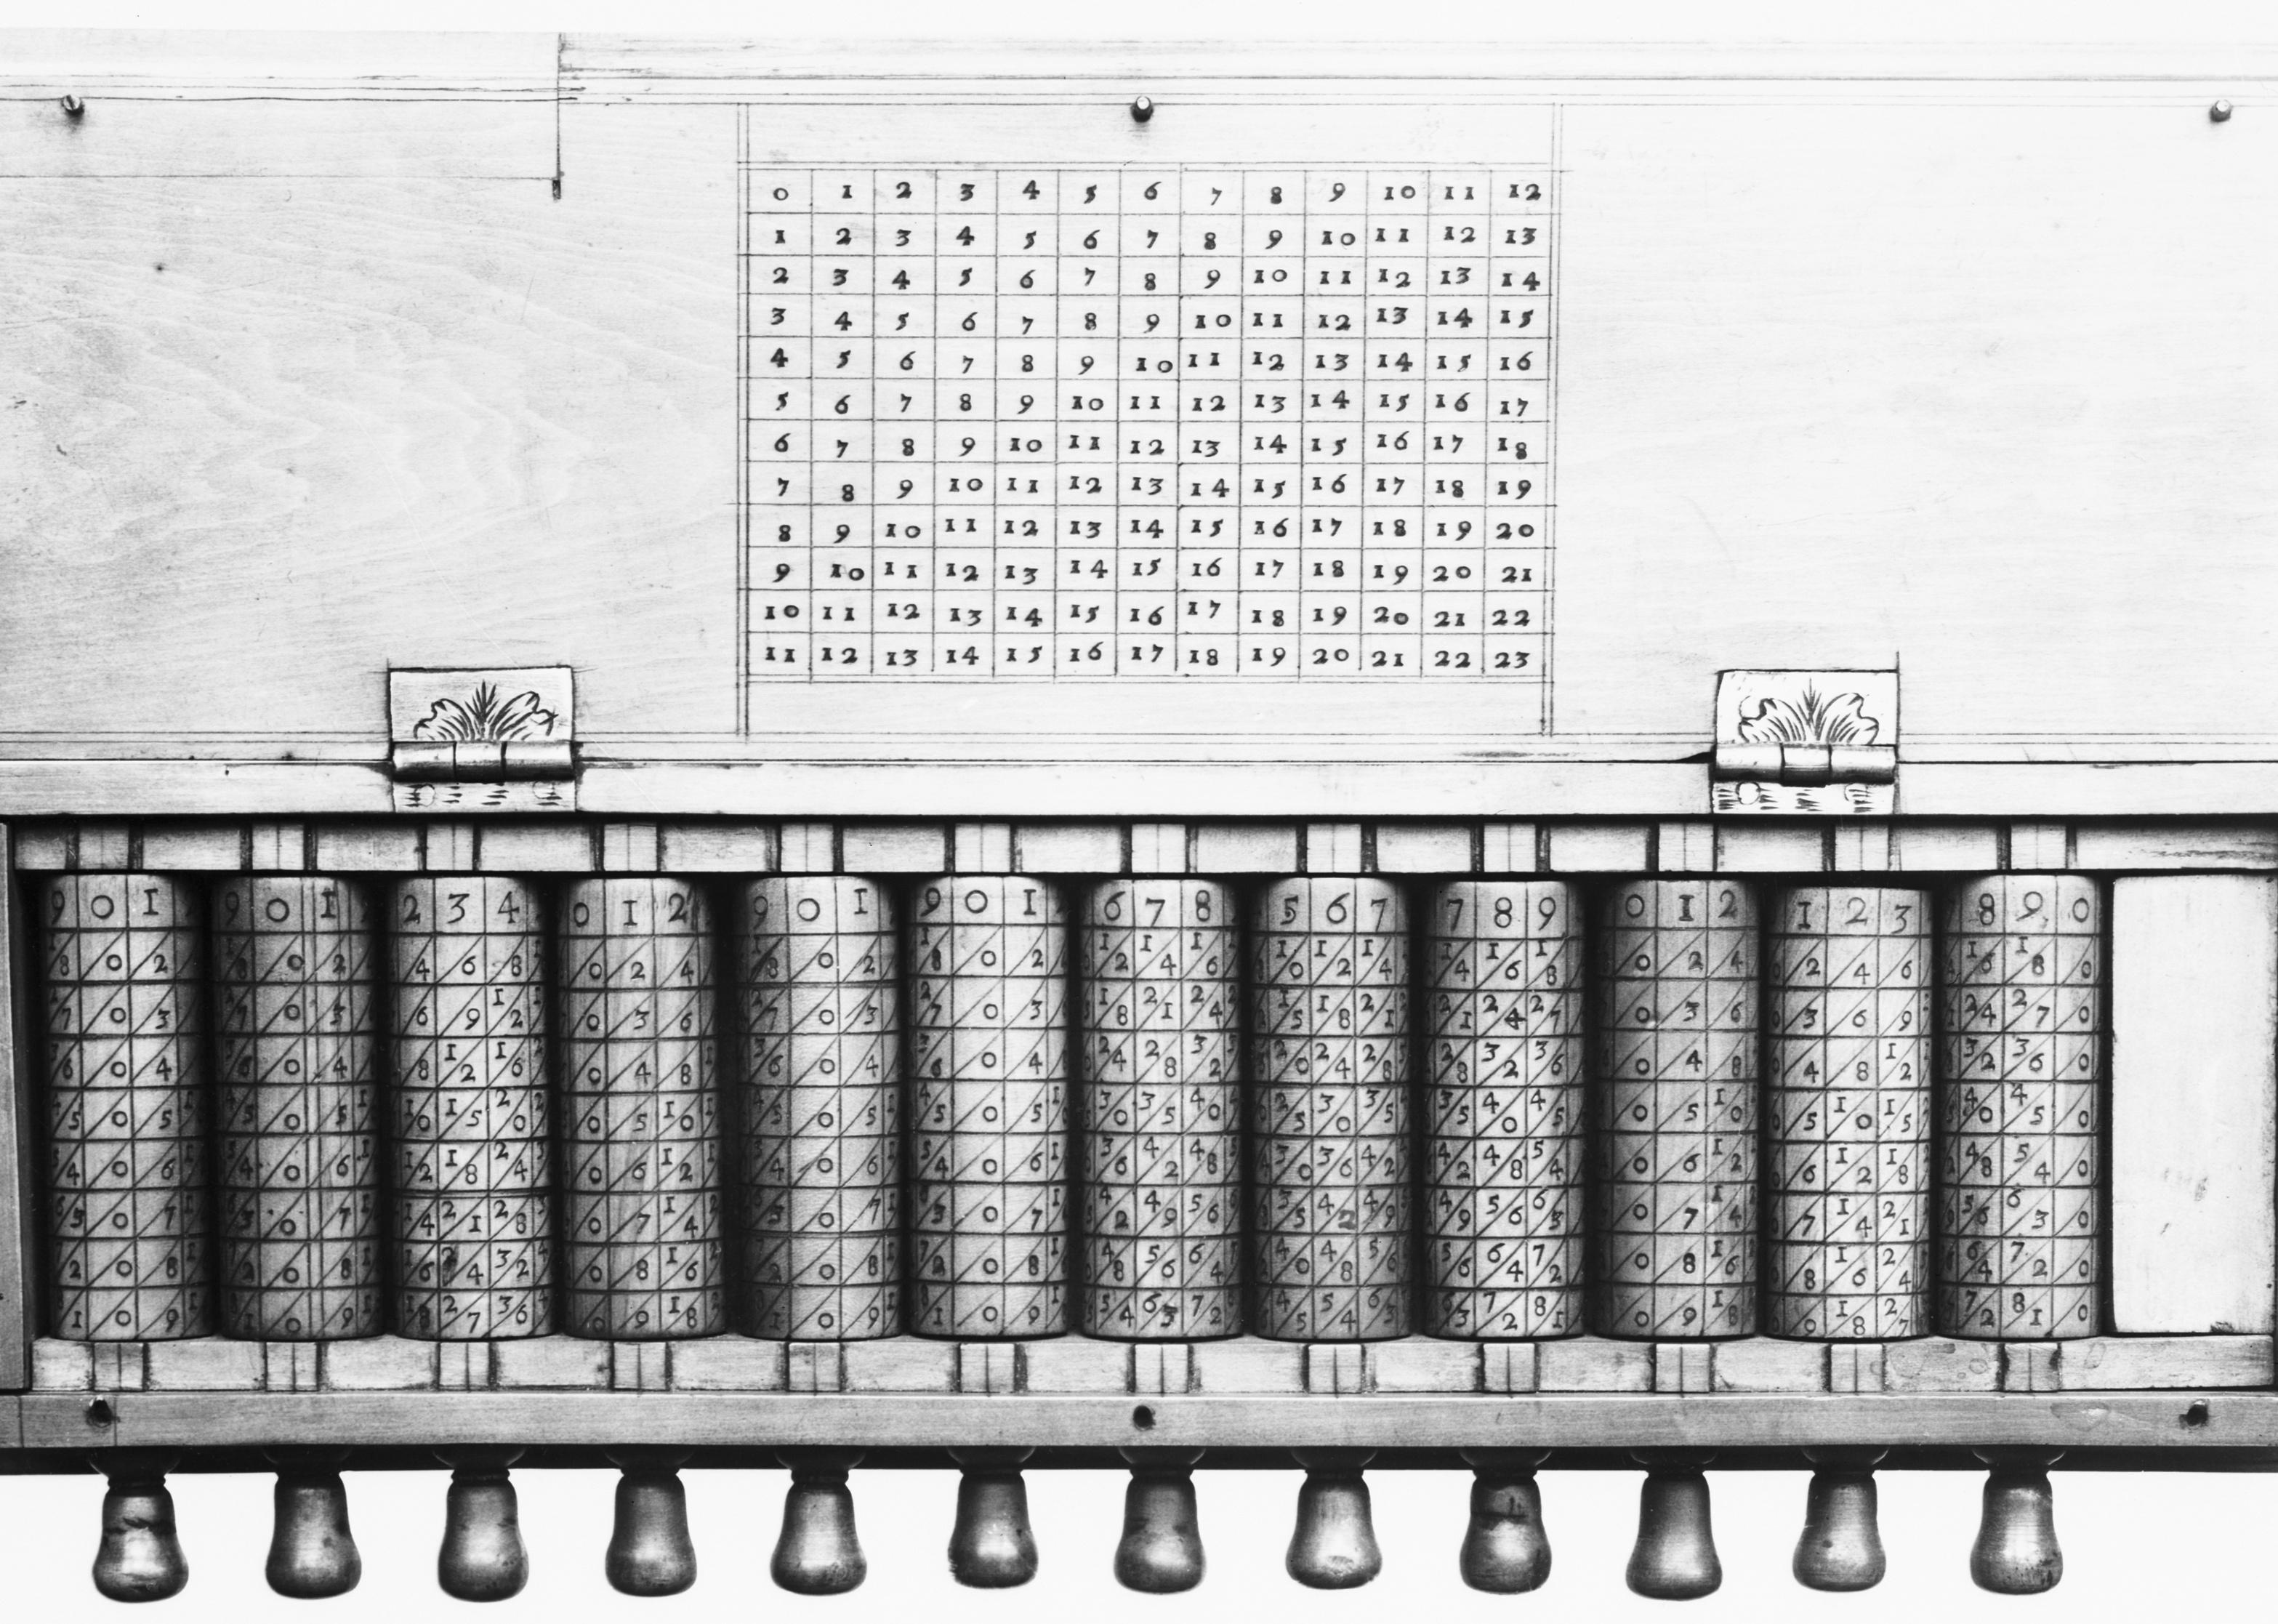 A sketch of the calculating device , "Napier's Bones", which consists of cylinders inscribed with multiplication tables.